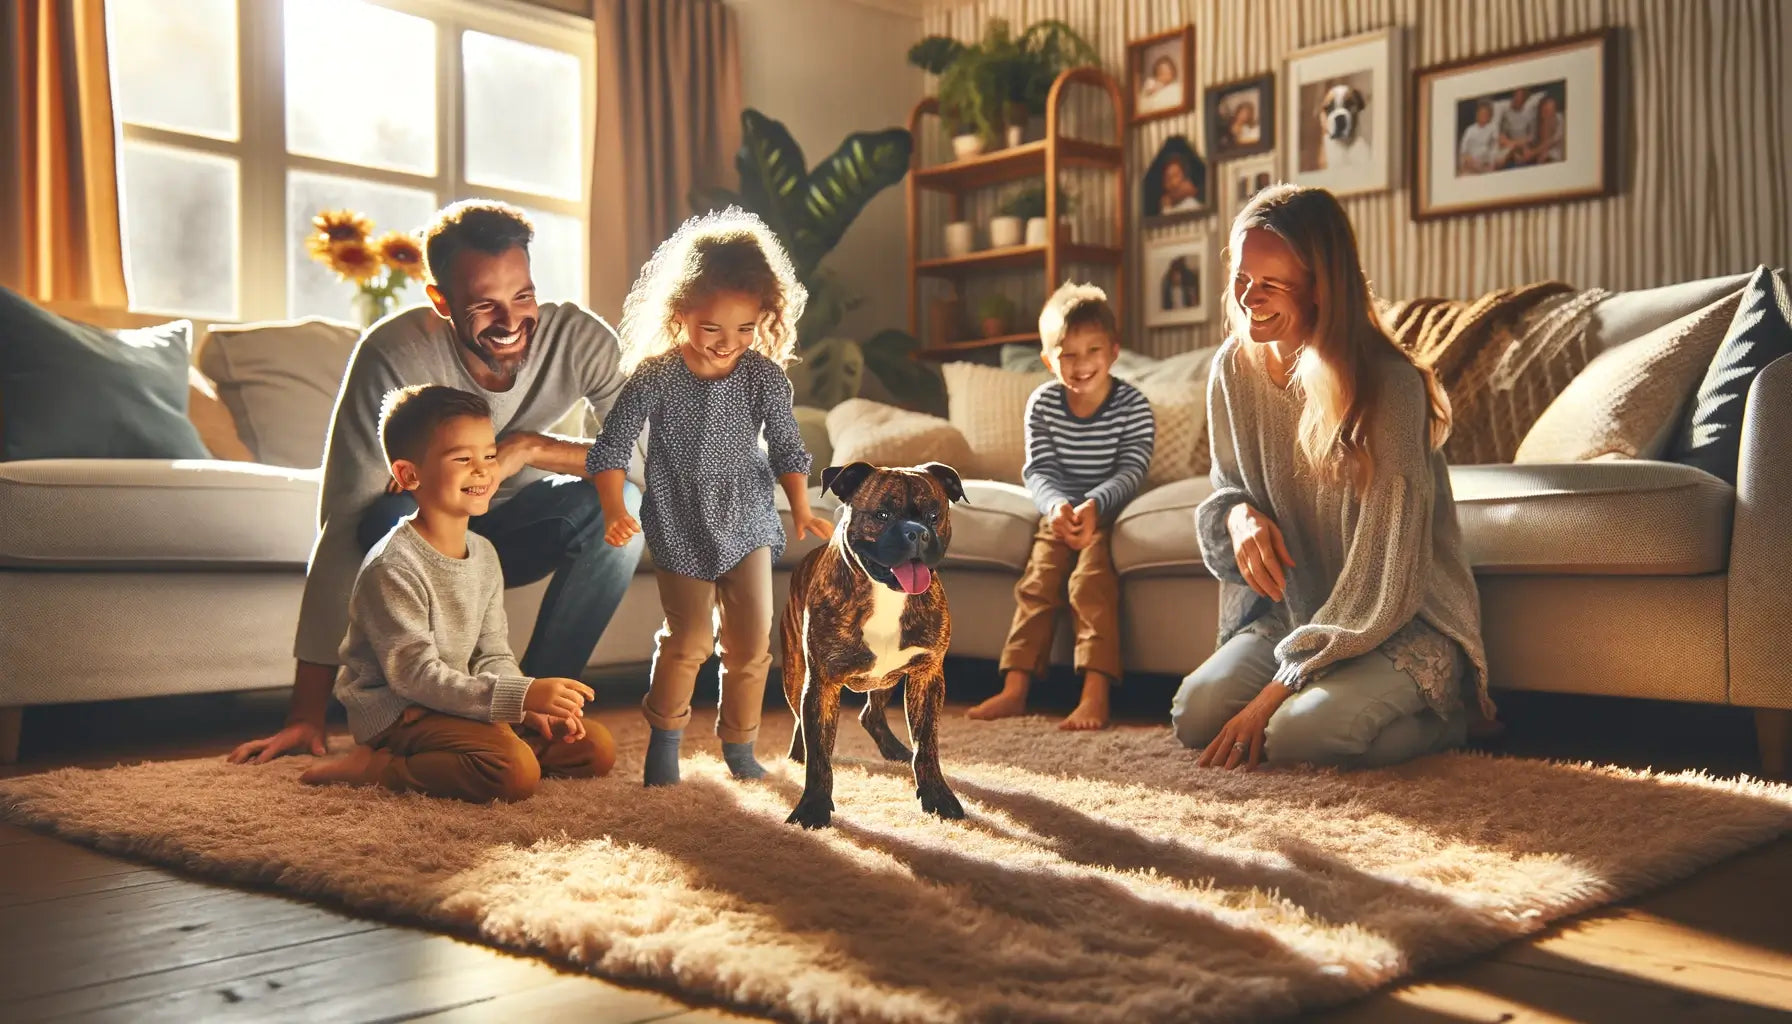 A cozy sunlit living room scene where a family of four (two adults and two children) are spending quality time with their Pocket Bully dog.